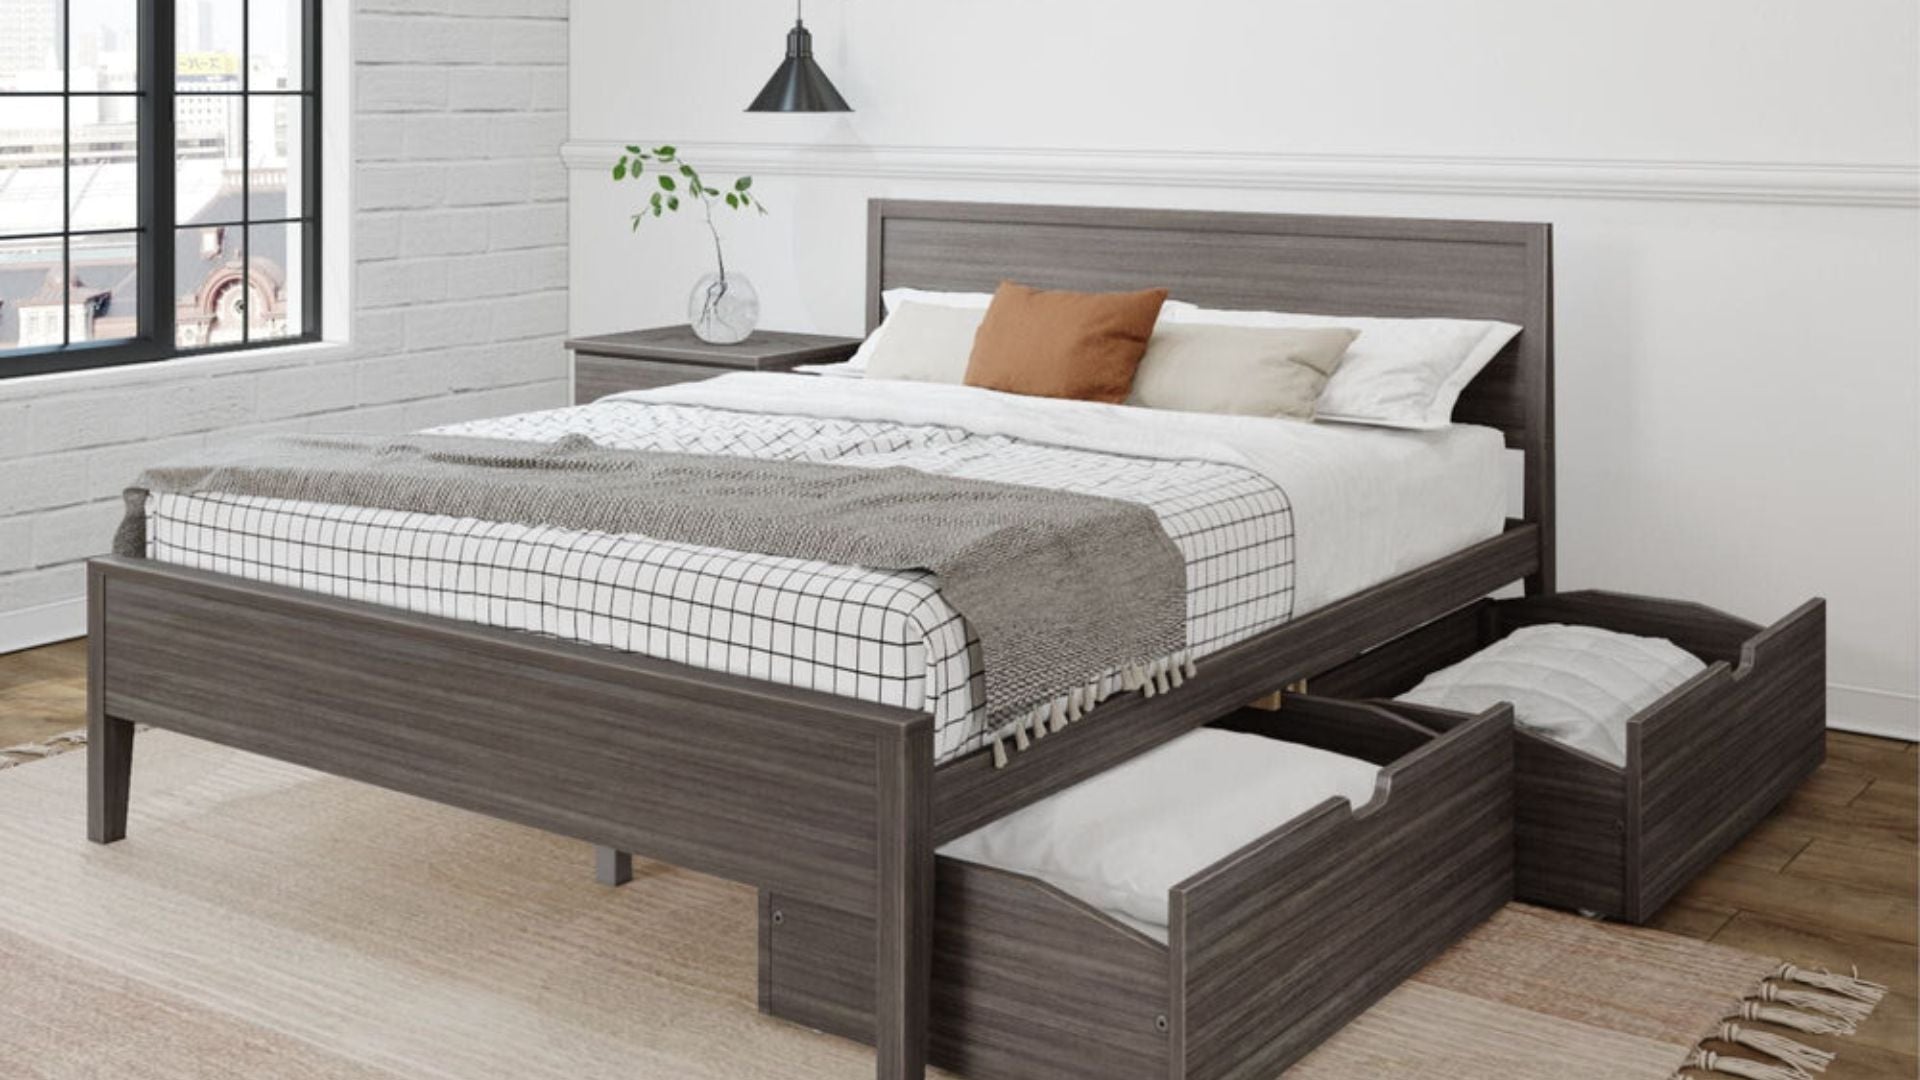 Modern solid wood bed with underbed storage drawers